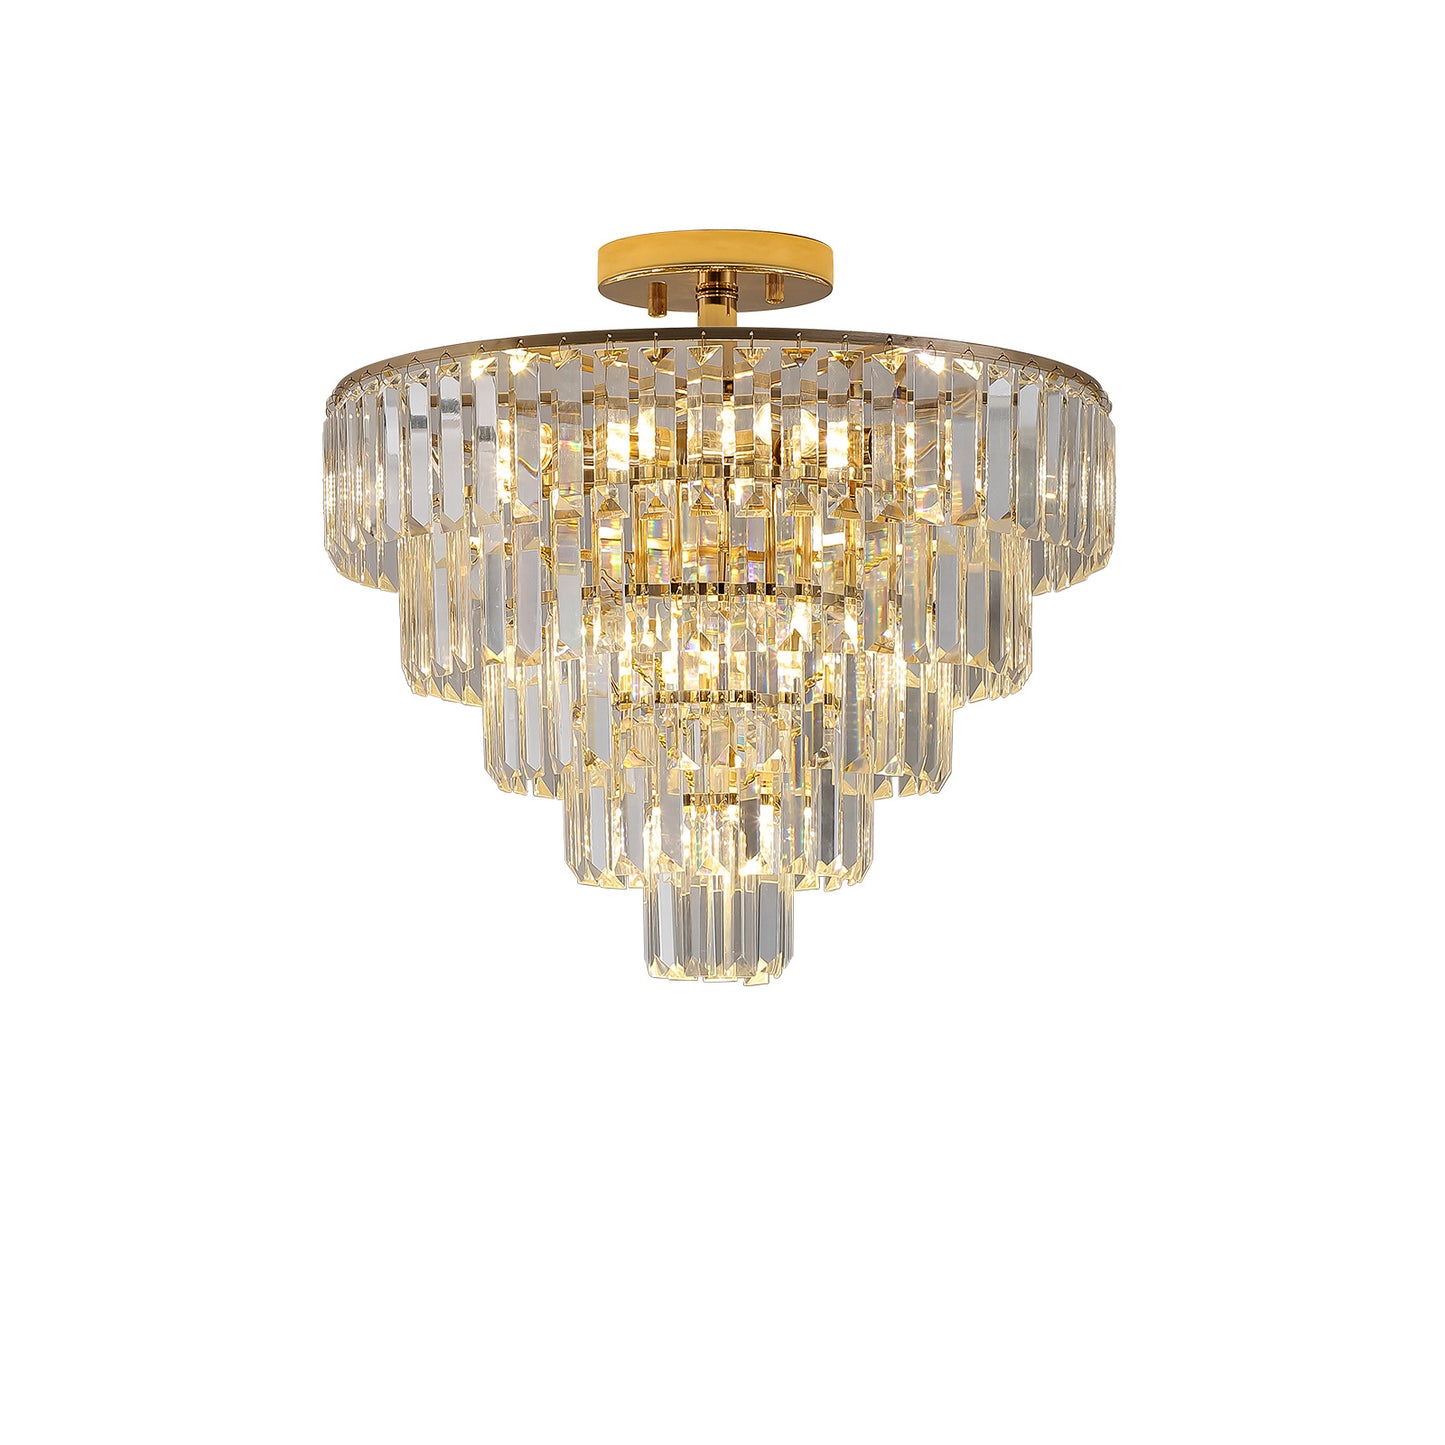 Gold Crystal Chandeliers,5-Tier Round Semi Flush Mount Chandelier Light Fixture,Large Contemporary Luxury Ceiling Lighting for Living Room Dining Room Bedroom Hallway